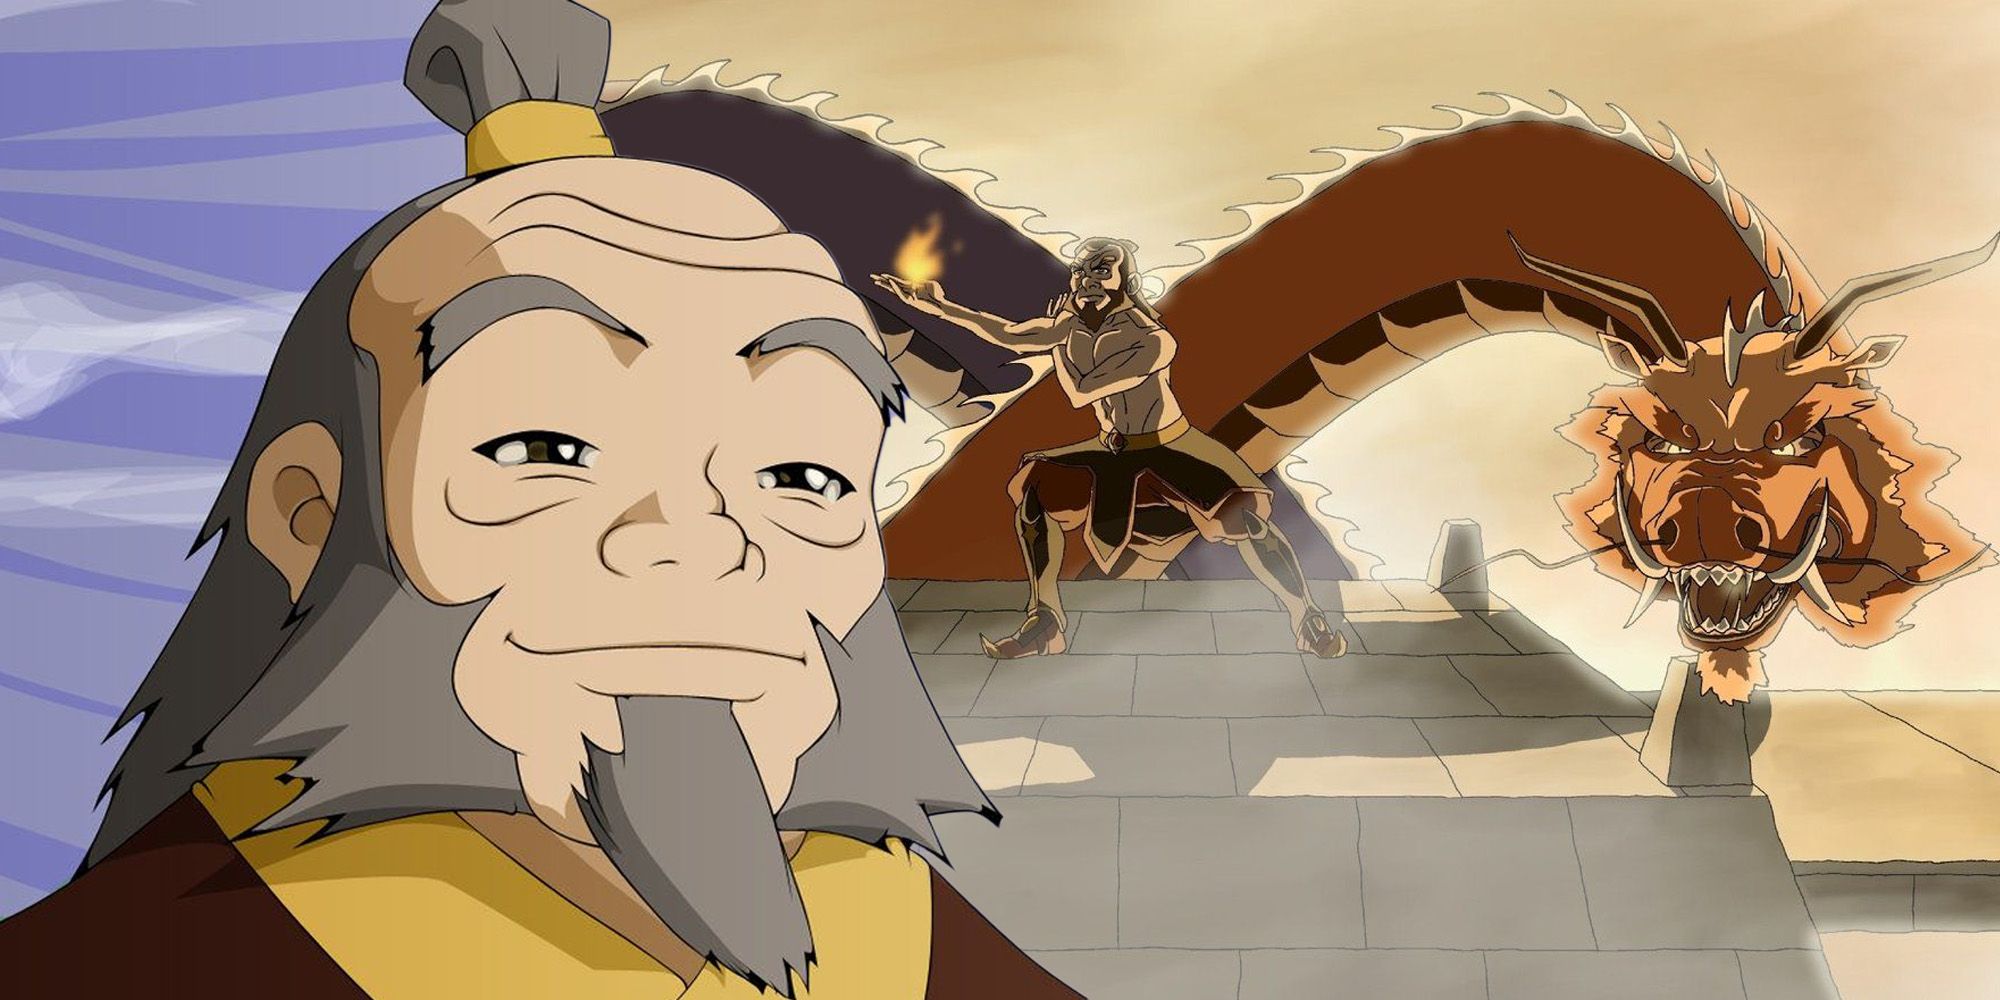 Iroh’s early travels led him to train with the Sun Warriors and the origina...